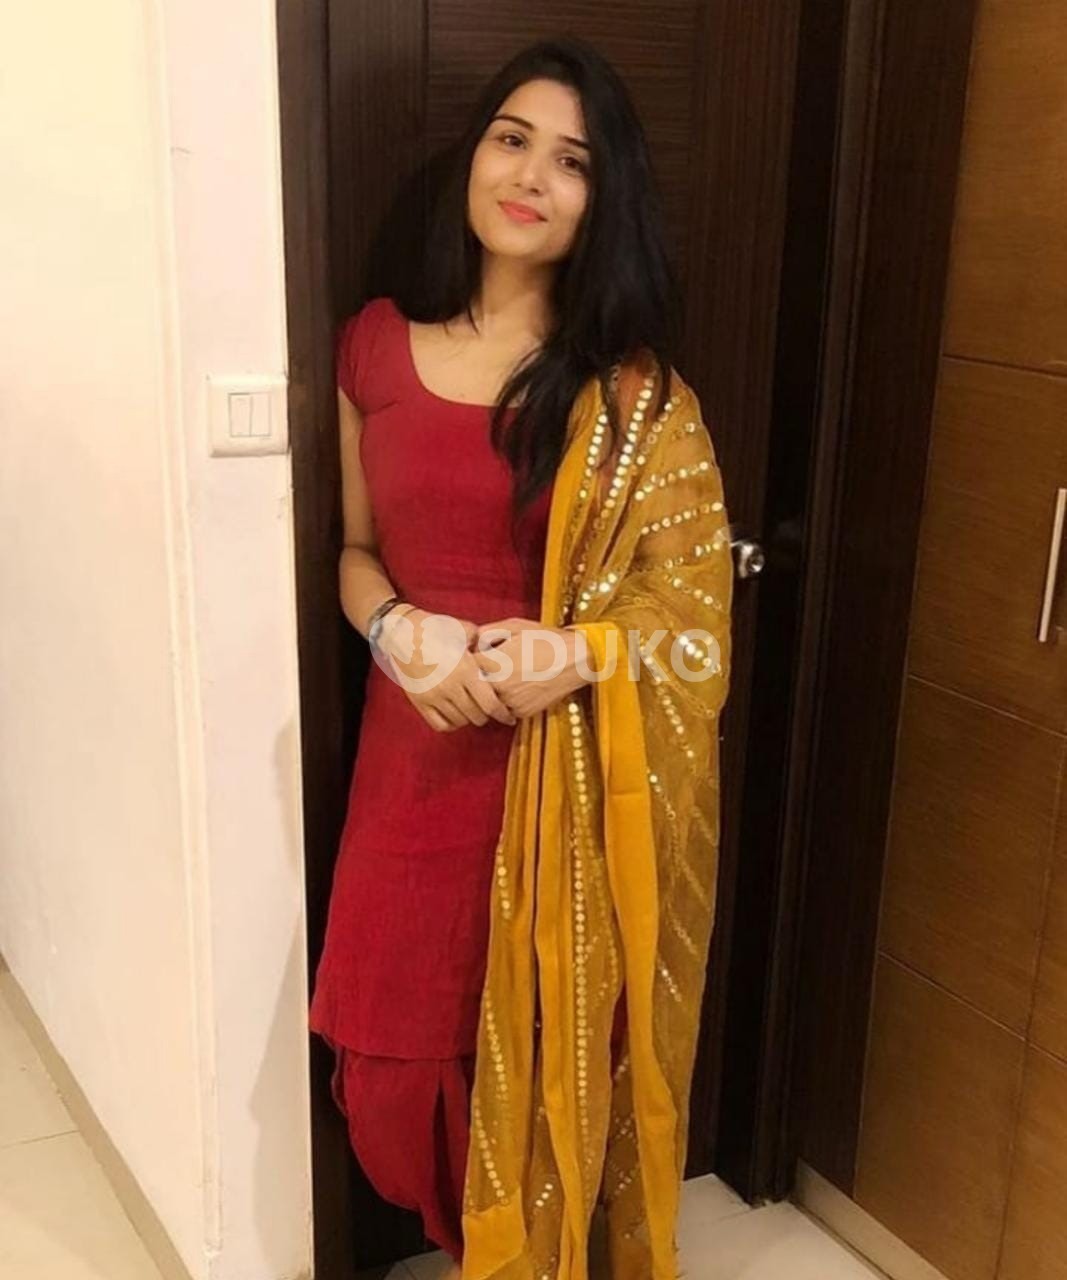 √JANAKPURI PRIYA GENINUNE ESCORT SERVICE IN CALL OUT CALL IN AVAILABLE PROVIDE WITH HOTEL & ROOM ...